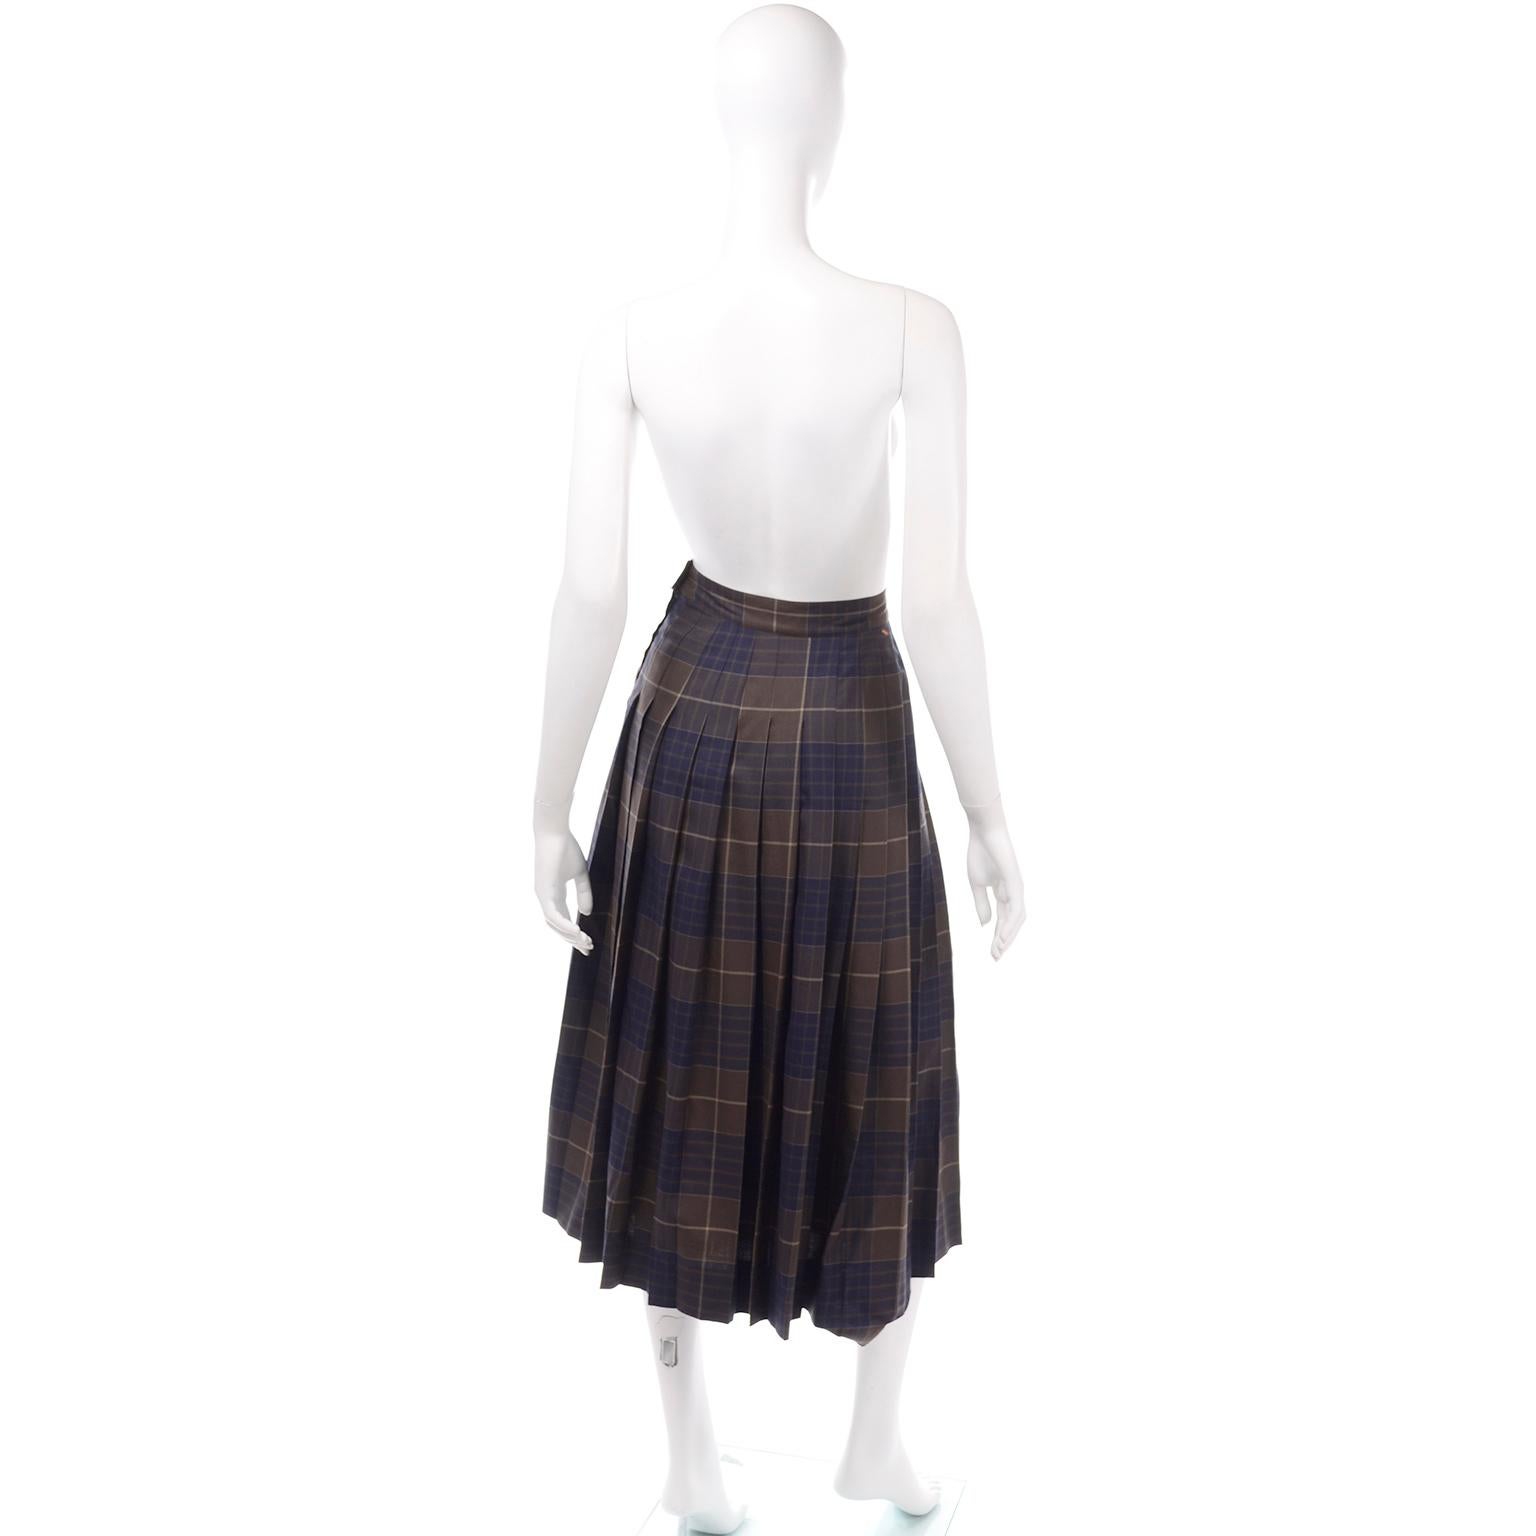 blue and brown plaid skirt